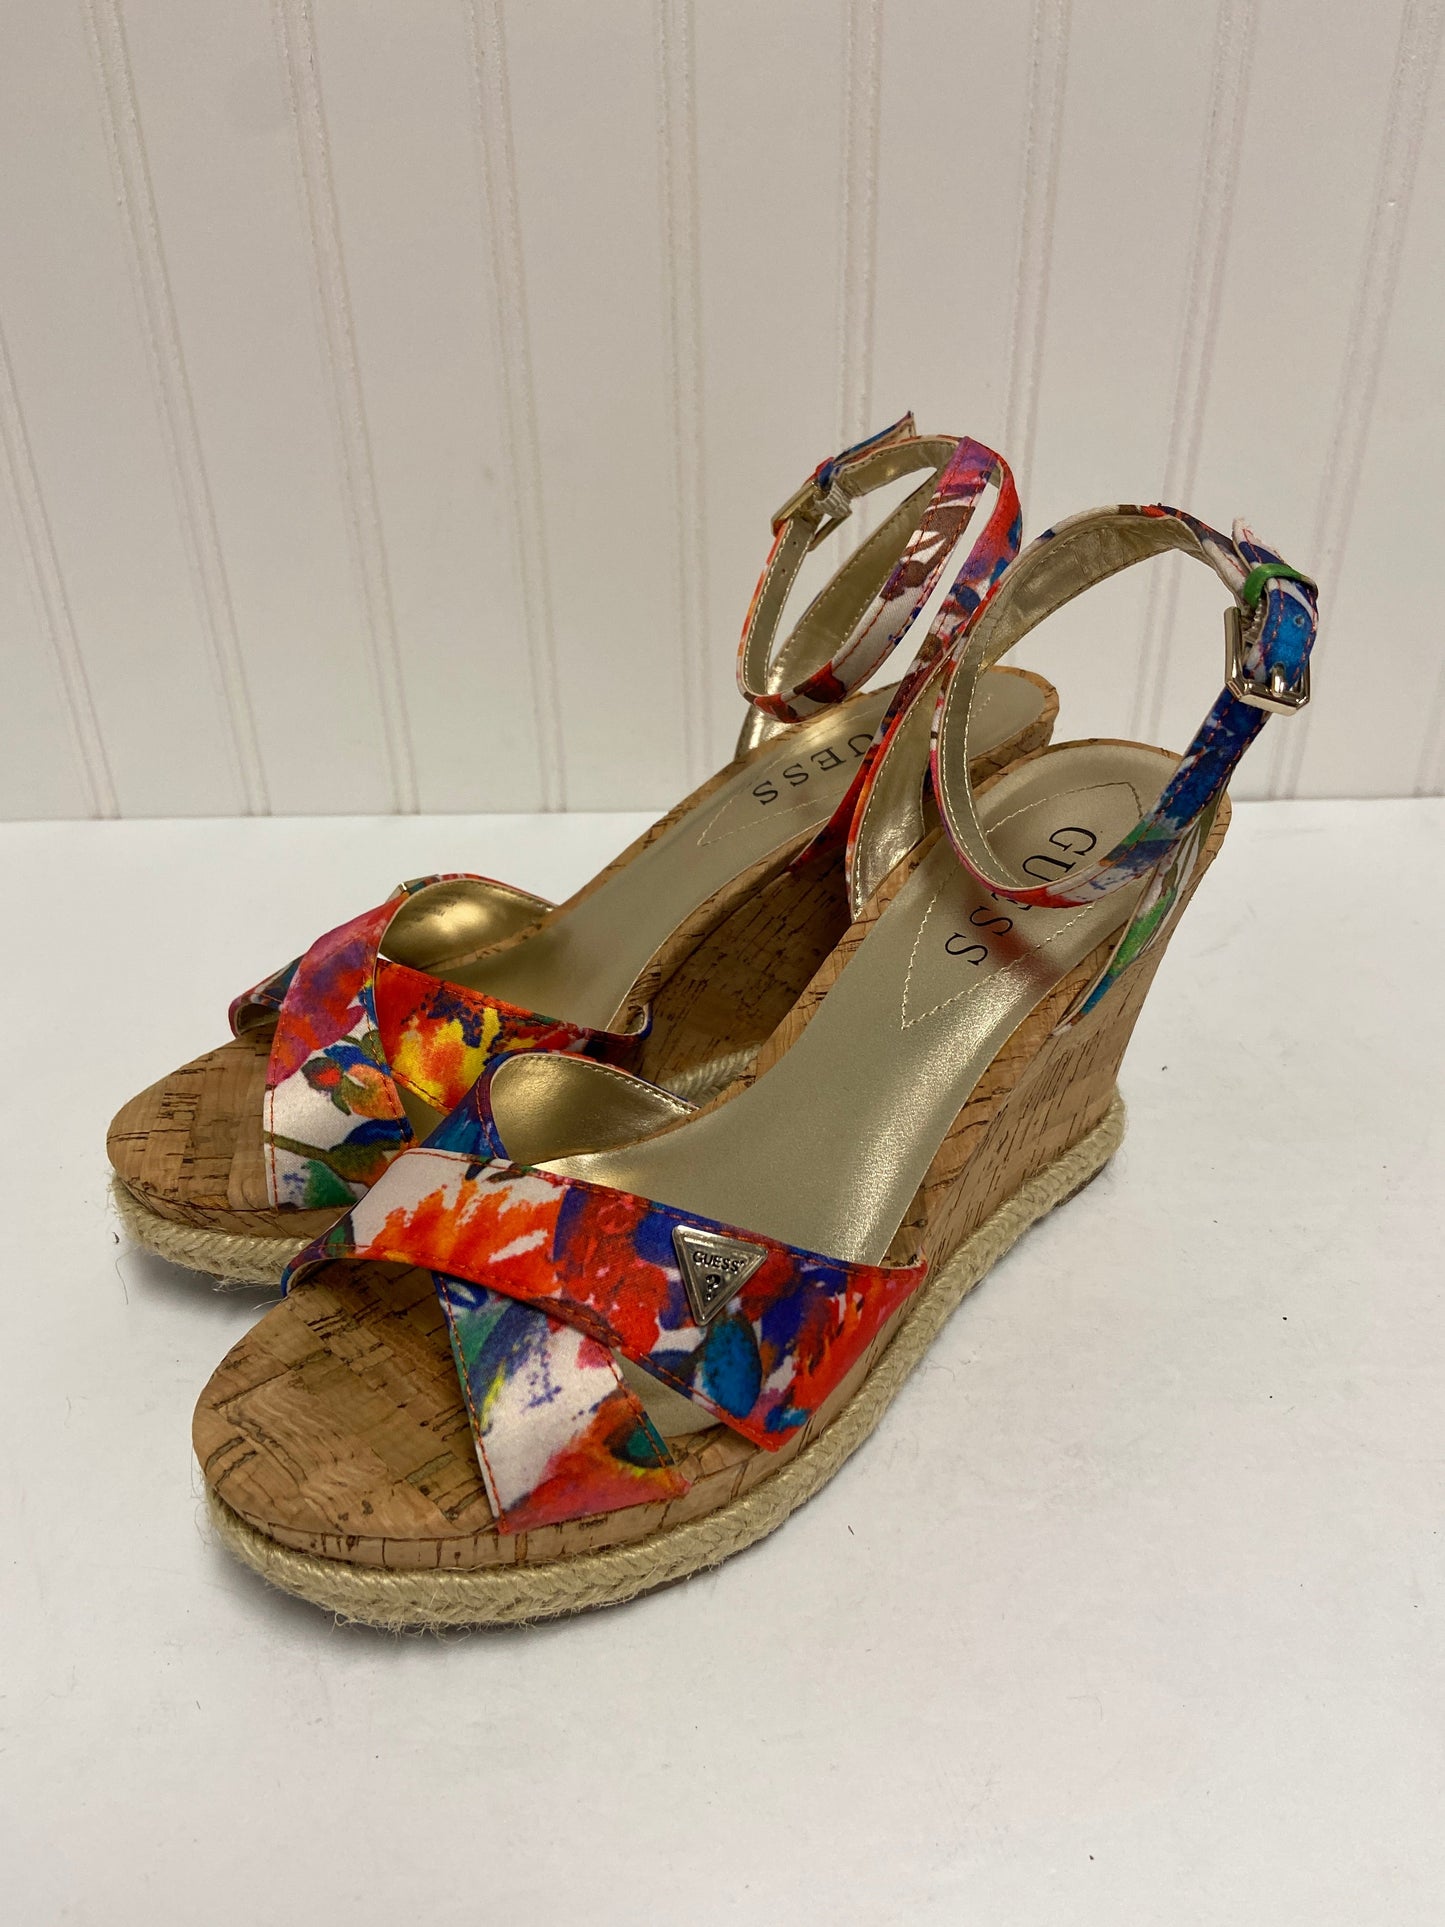 Multi-colored Sandals Heels Wedge Guess, Size 6.5